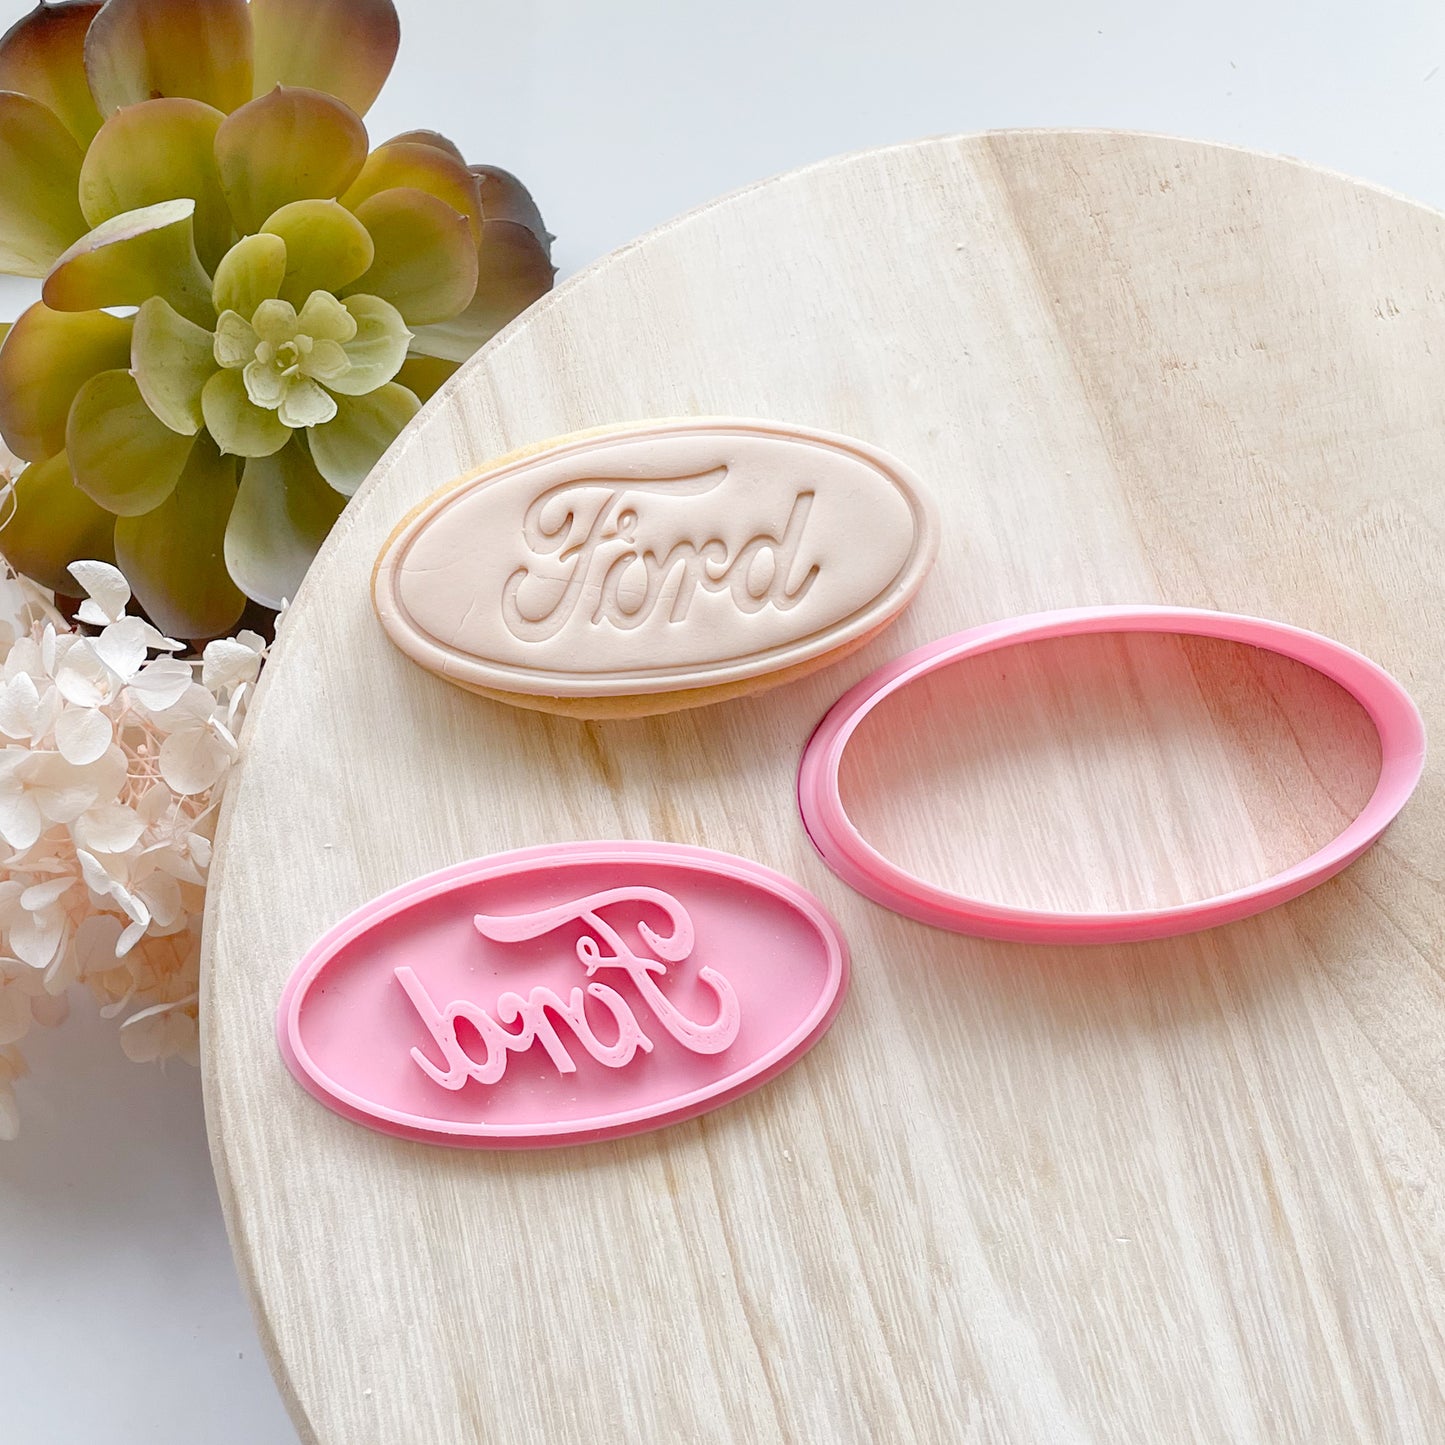 "Ford Logo" - Cookie Cutter & Stamp